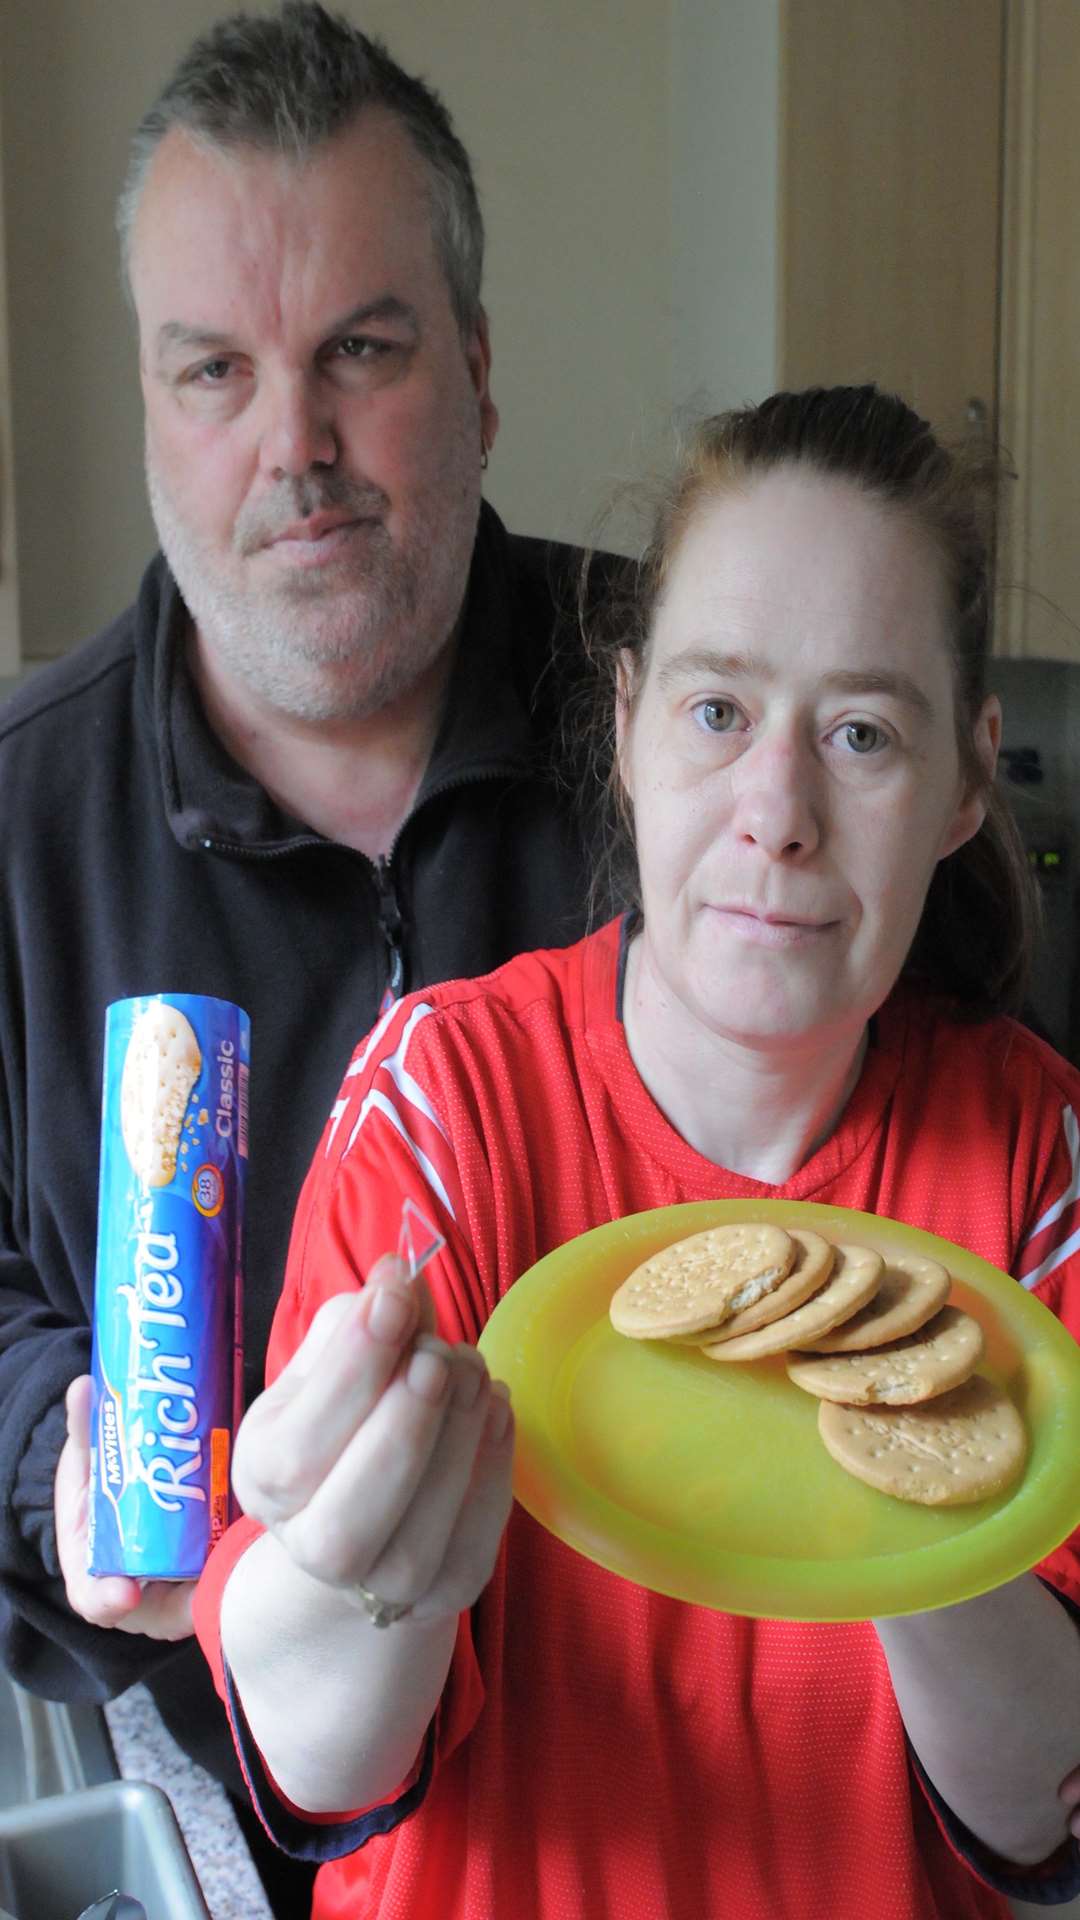 Danny and Caroline Williams found a piece of plastic in their biscuits